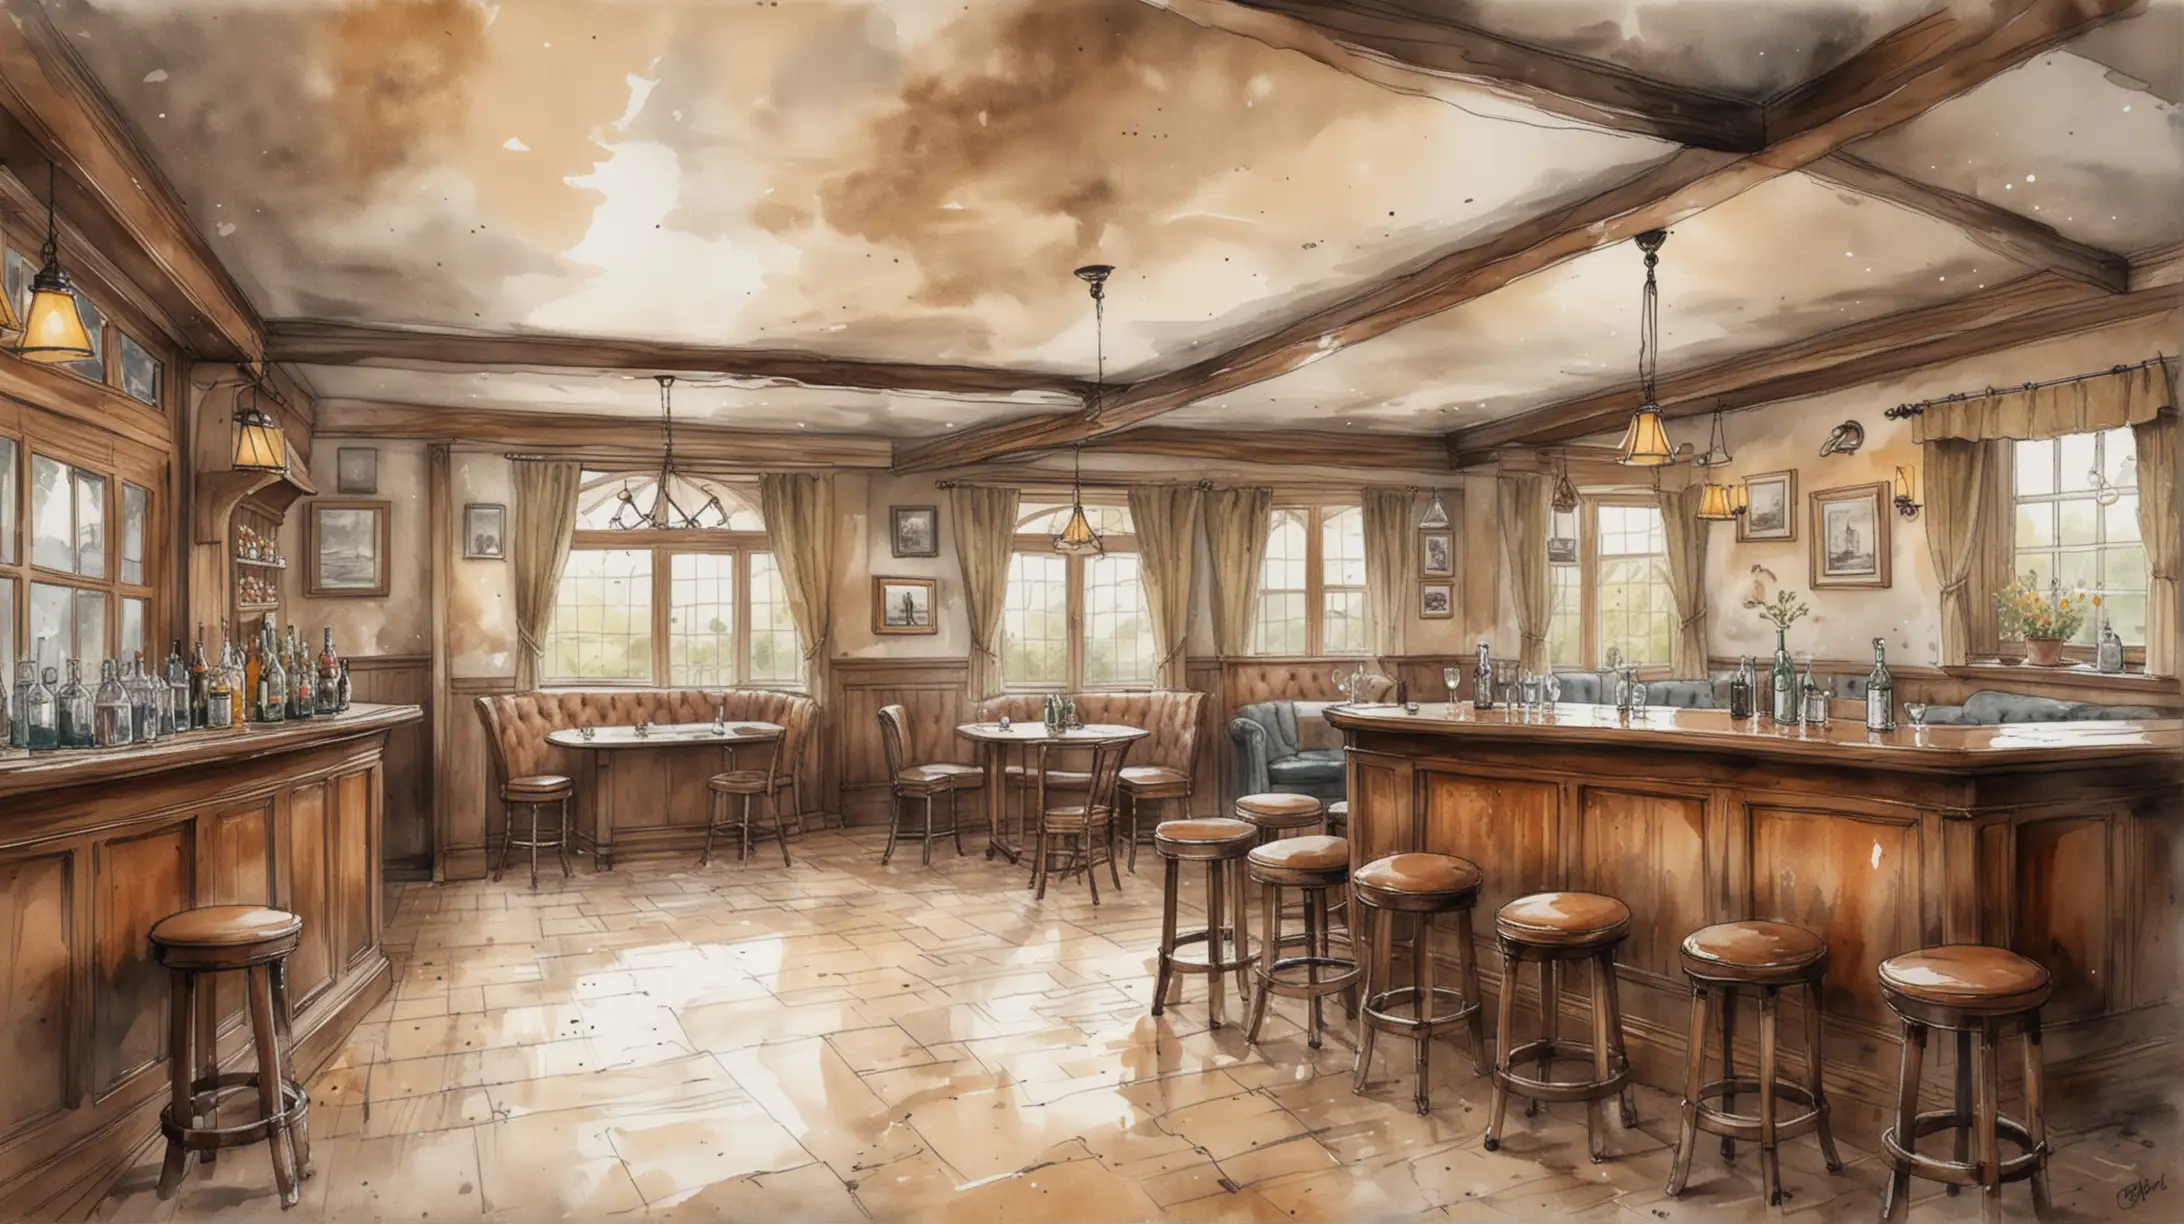 Watercolor Sketch of Rustic English Country Pub Interior with Smoke